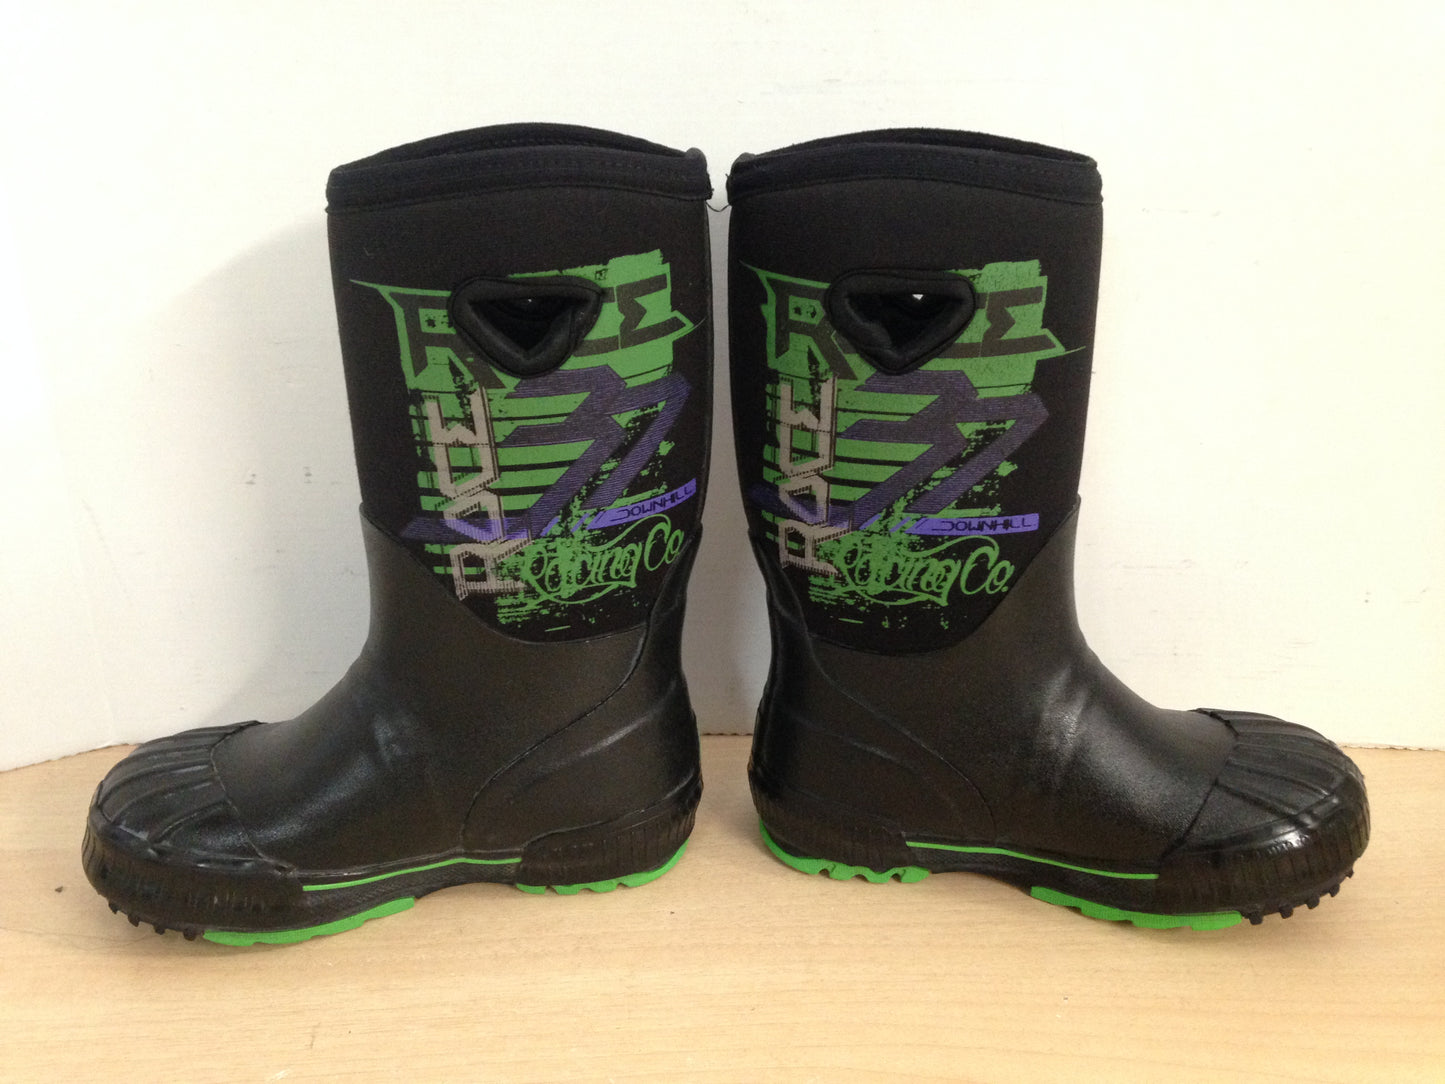 Bogs Style Child Size 1 Neoprene Rubber Boots Green Black Purple Excellent